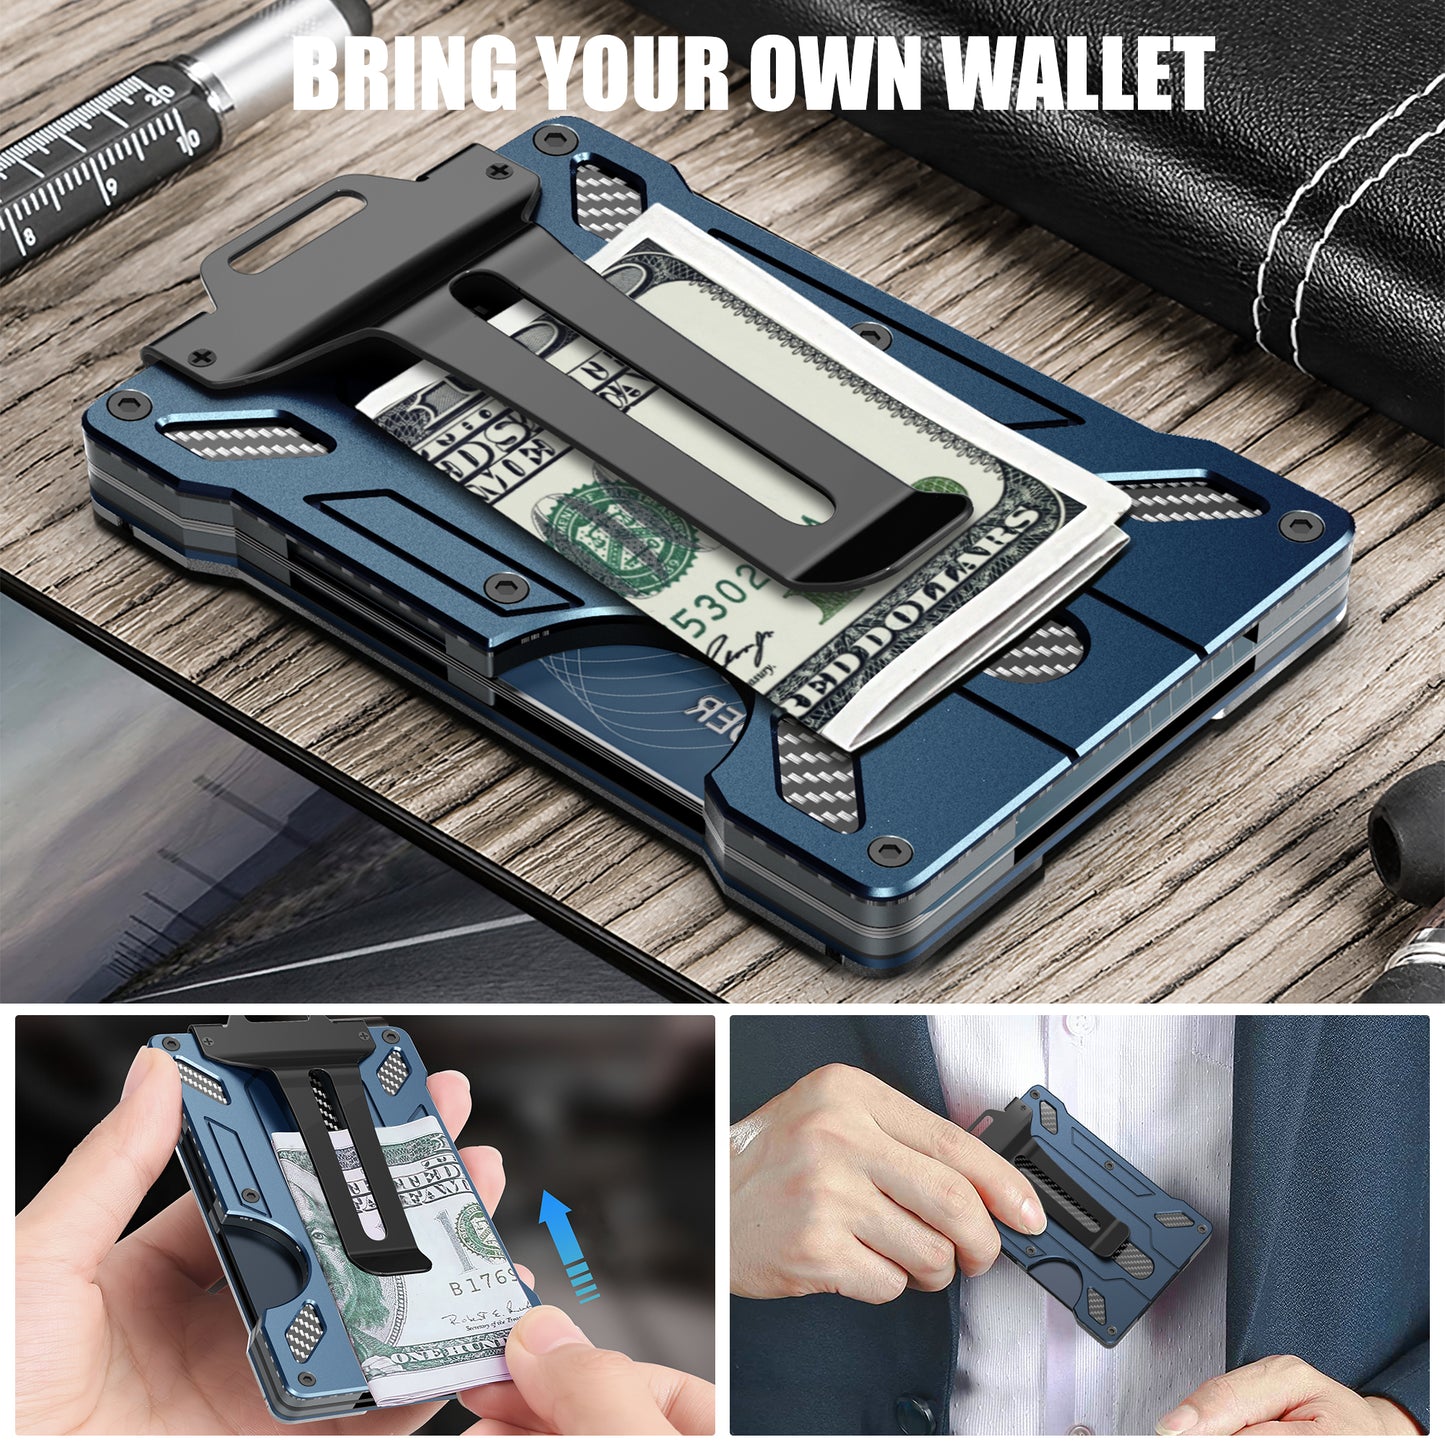 Wallet For Men - Slim Aluminum Metal Money Clip with 1 Clear window ID Badge Holder, RFID Blocking, Holds up 15 Cards with Cash Clip. Ultra-Thin Minimalist Wallet, blue